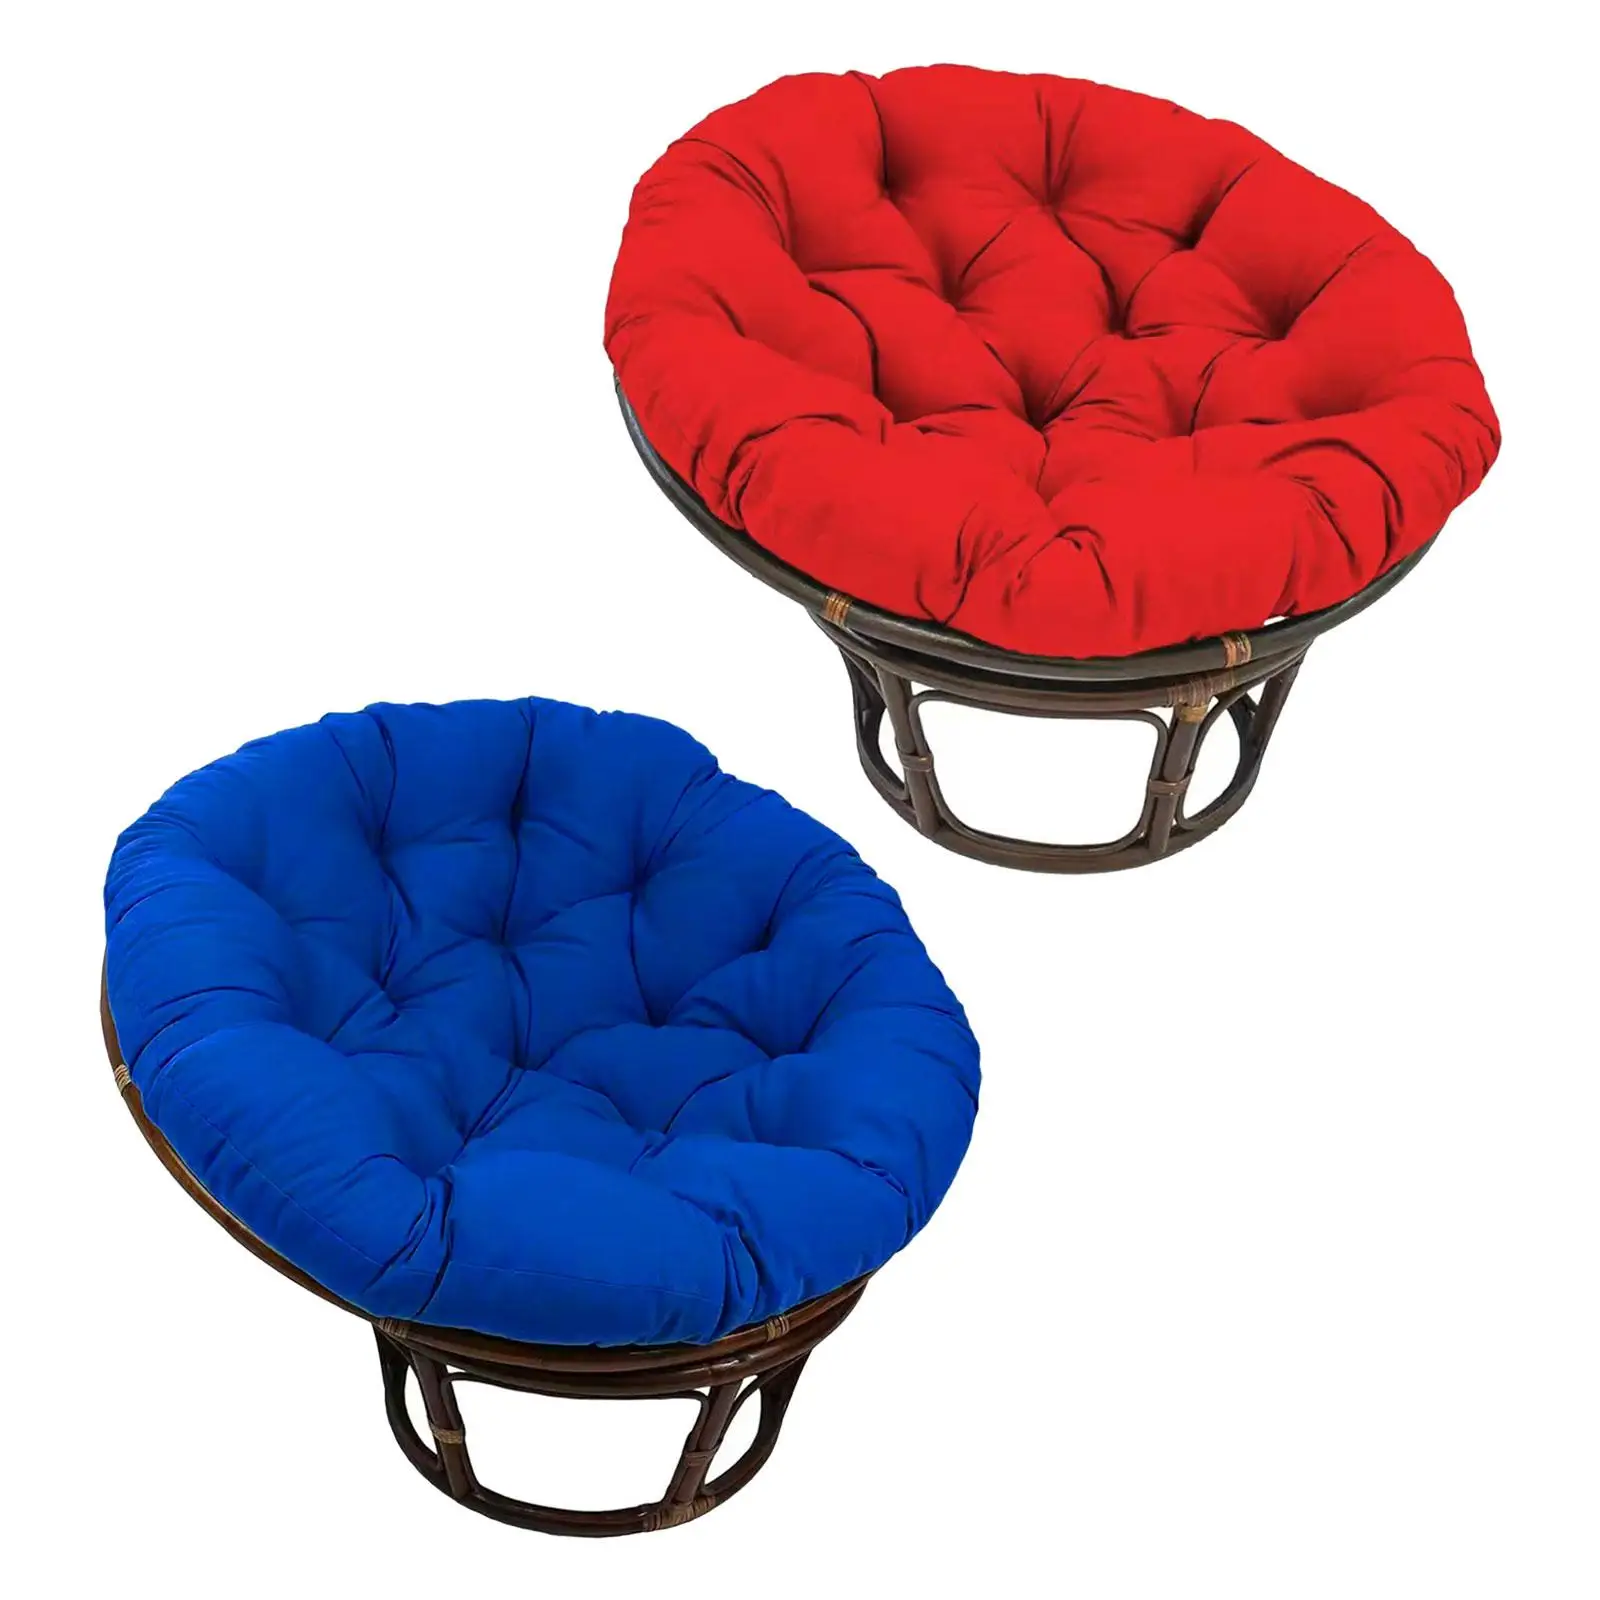 Egg Swing Chair Cushion Patio Outdoor Hanging Basket Chair Cushions Egg Chair Swing Chair Pads for Hammock Chair Hanging Beds